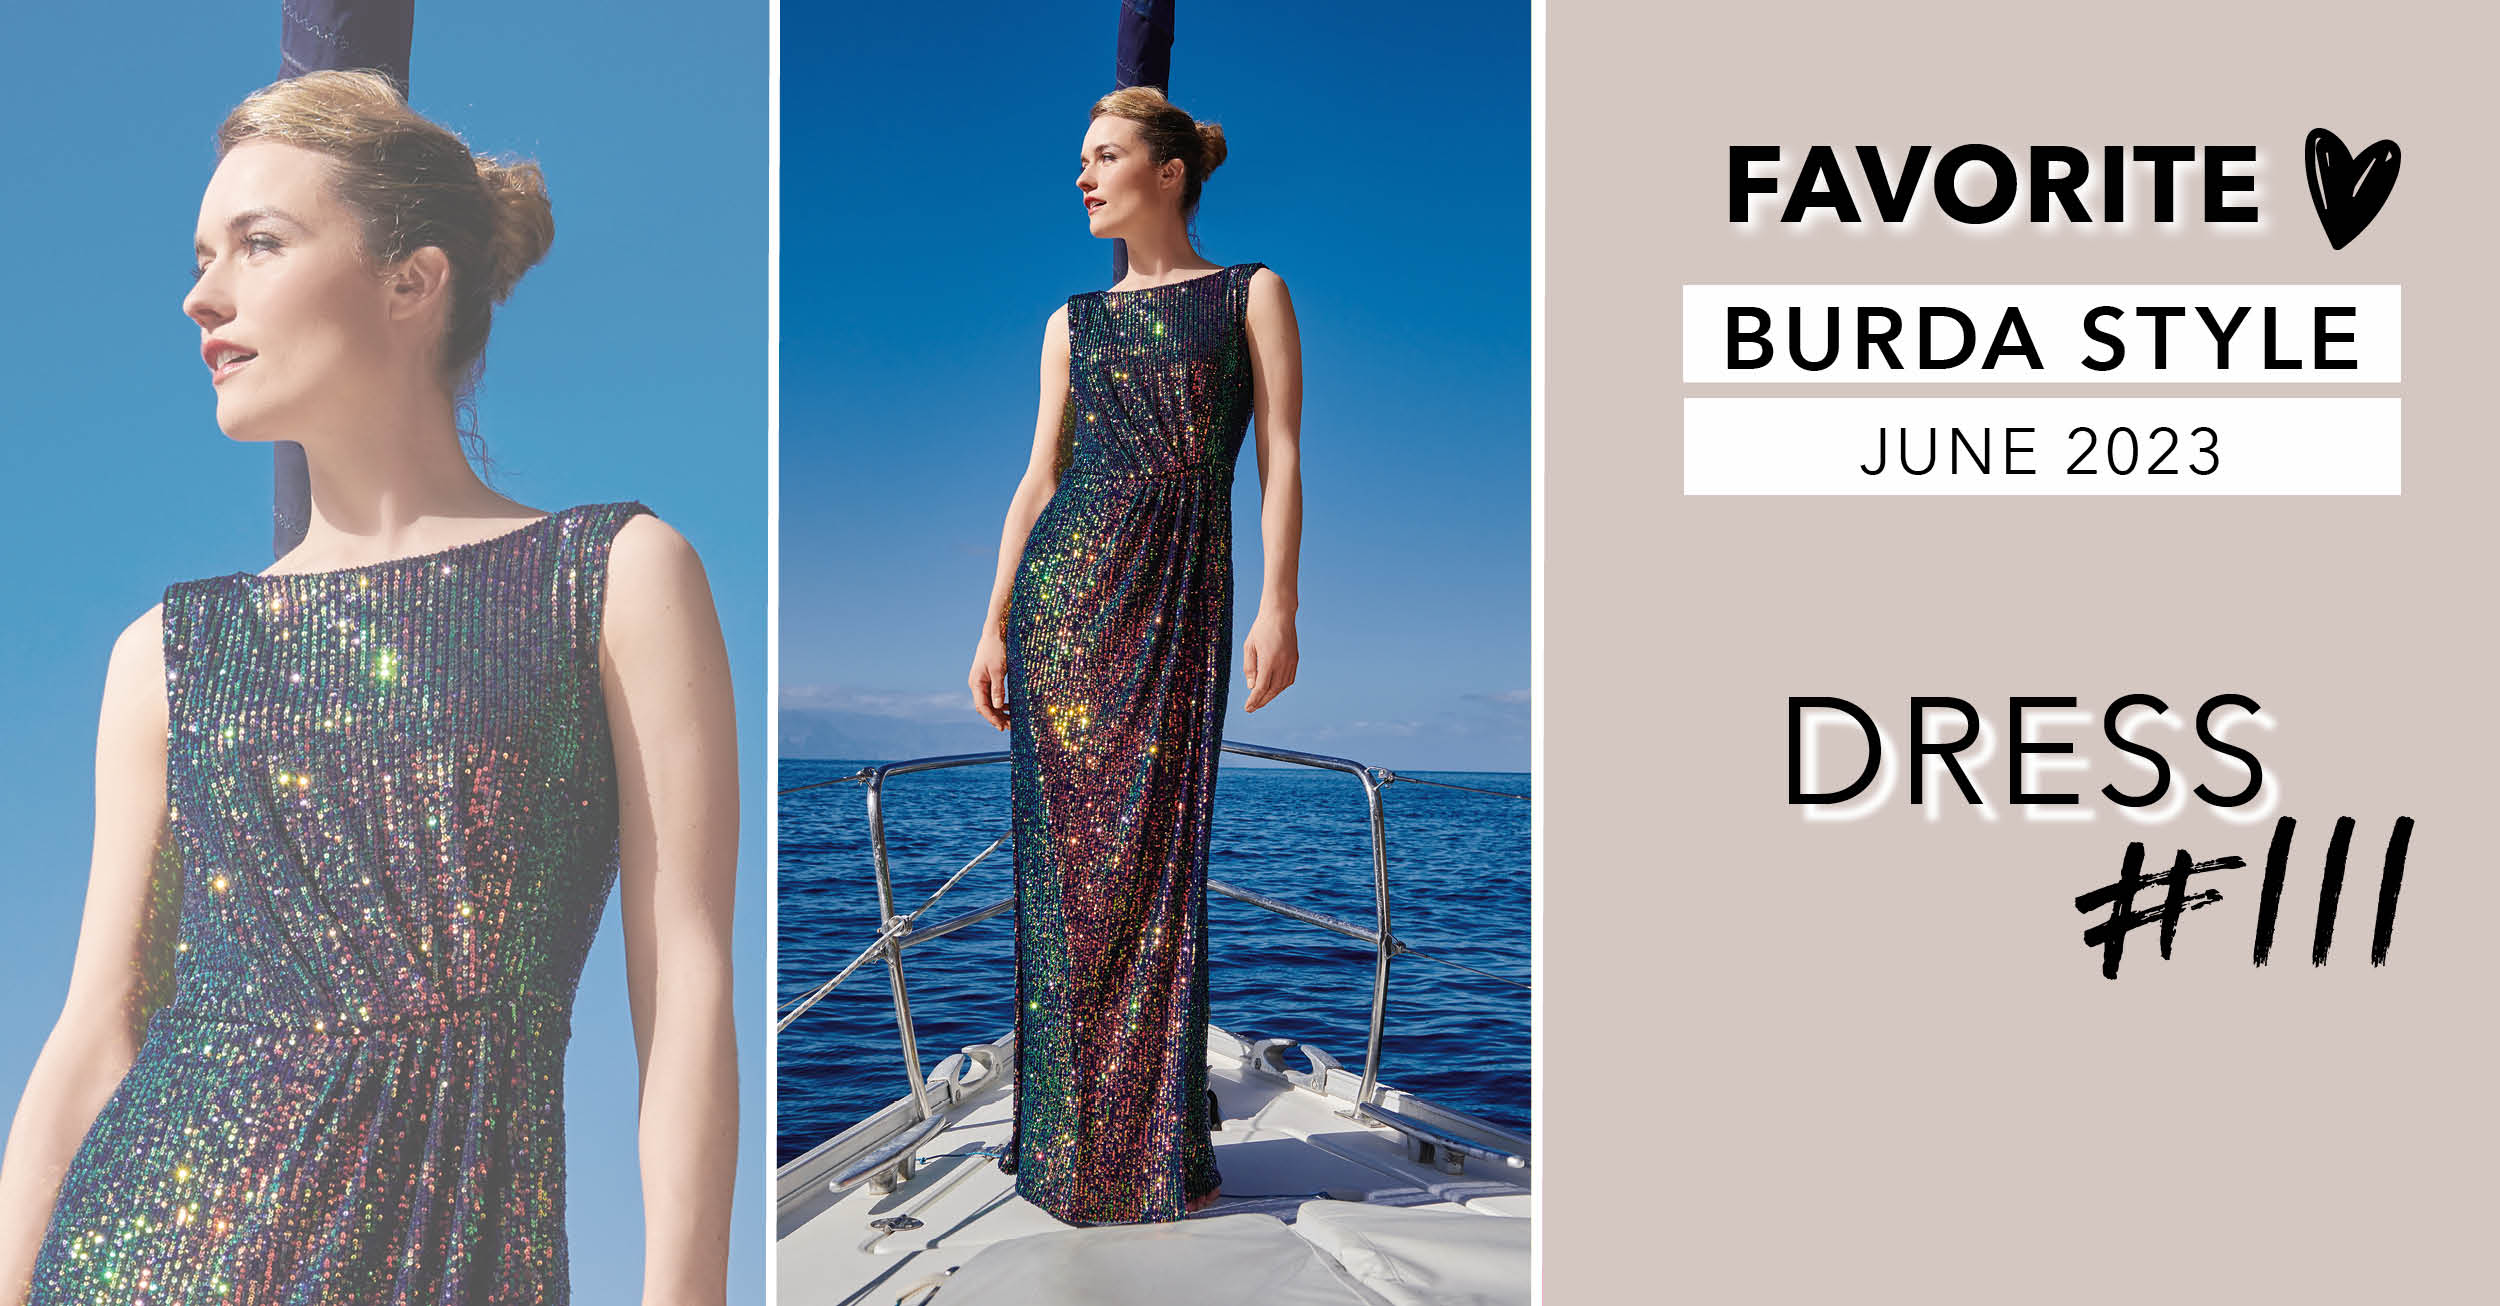 A Favorite: An Evening Gown from Burda Style June 2023